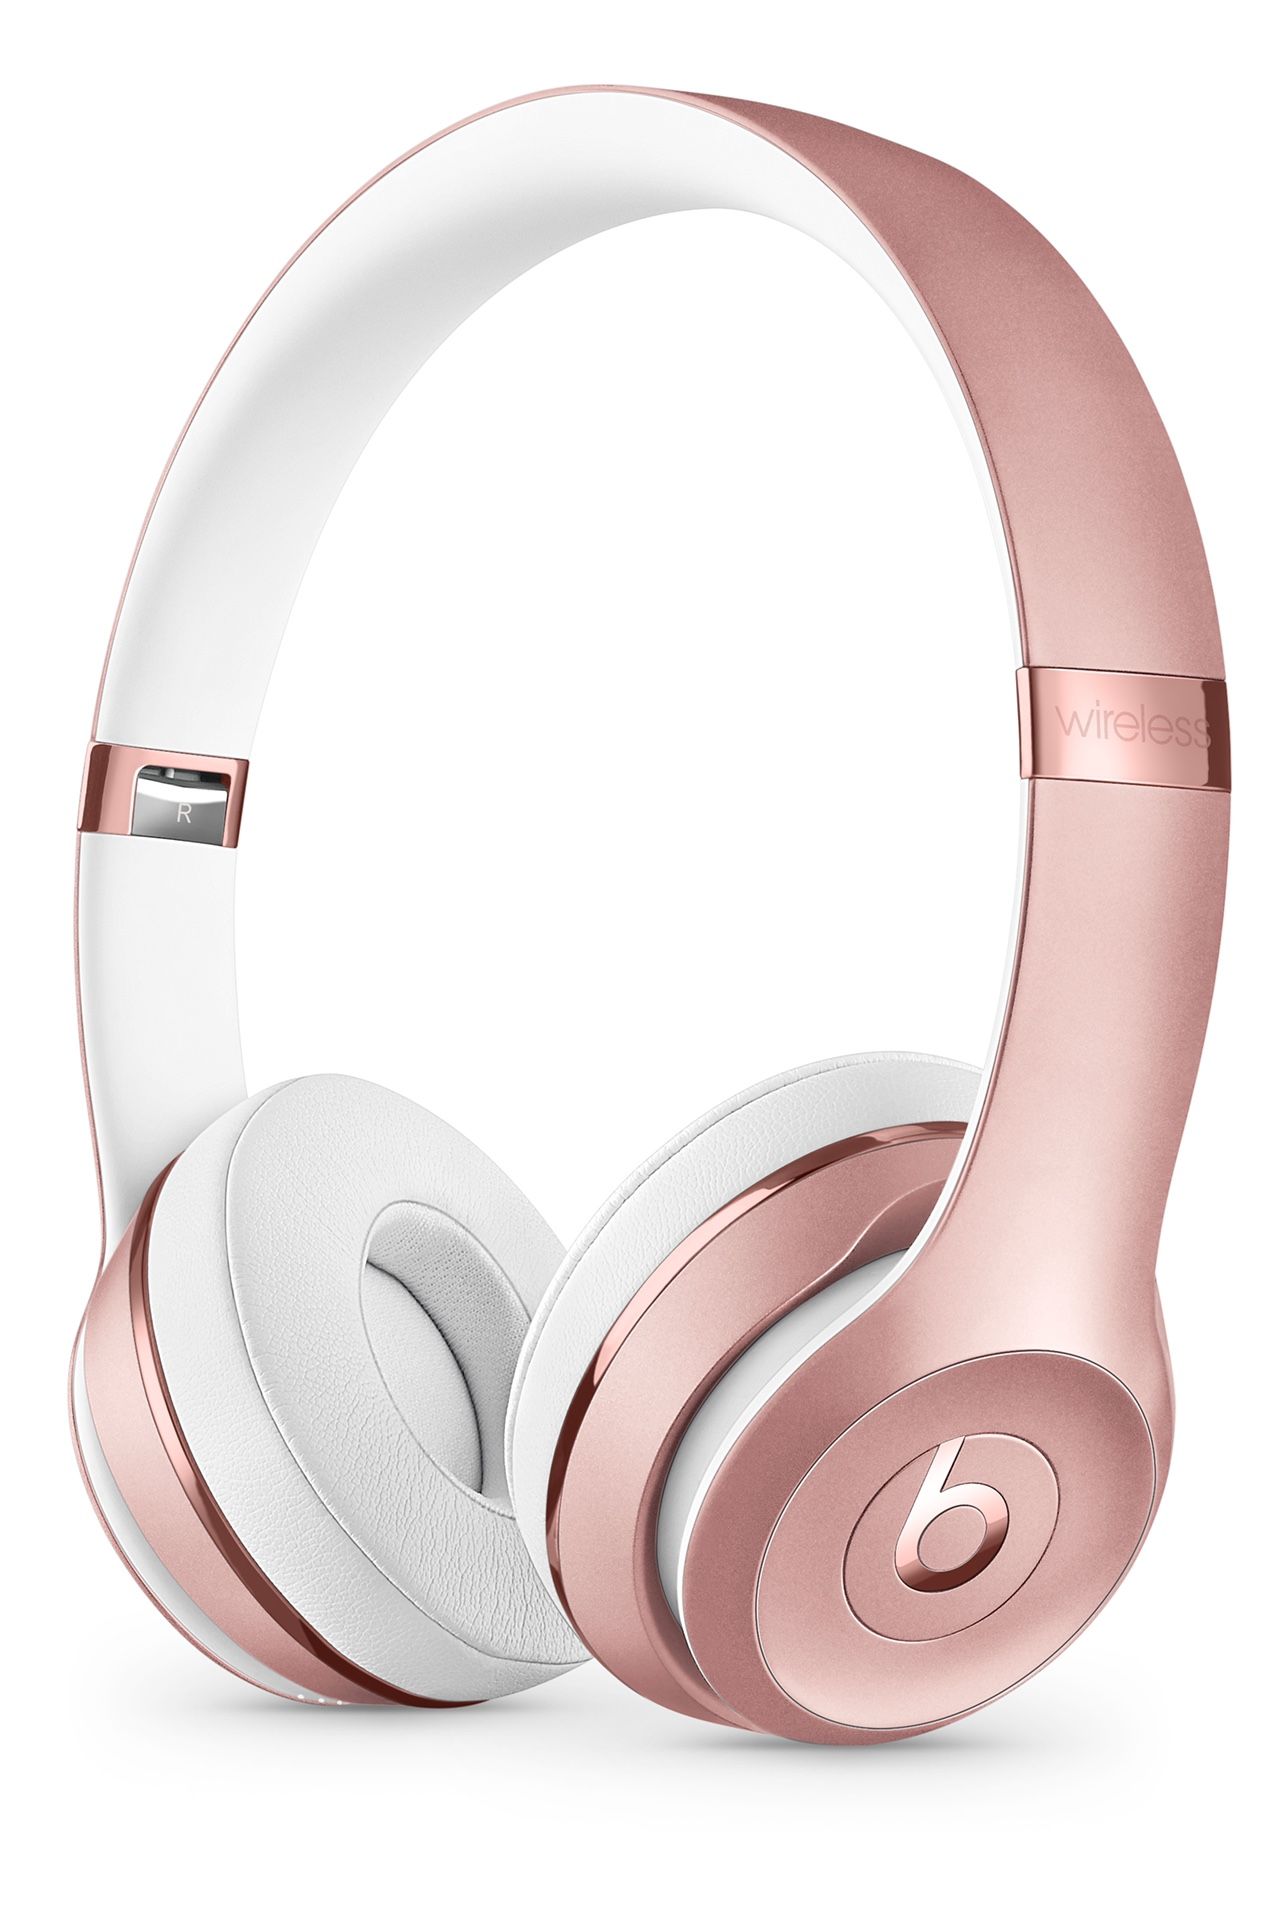 Beats Solo 3 Rose Gold Like New!